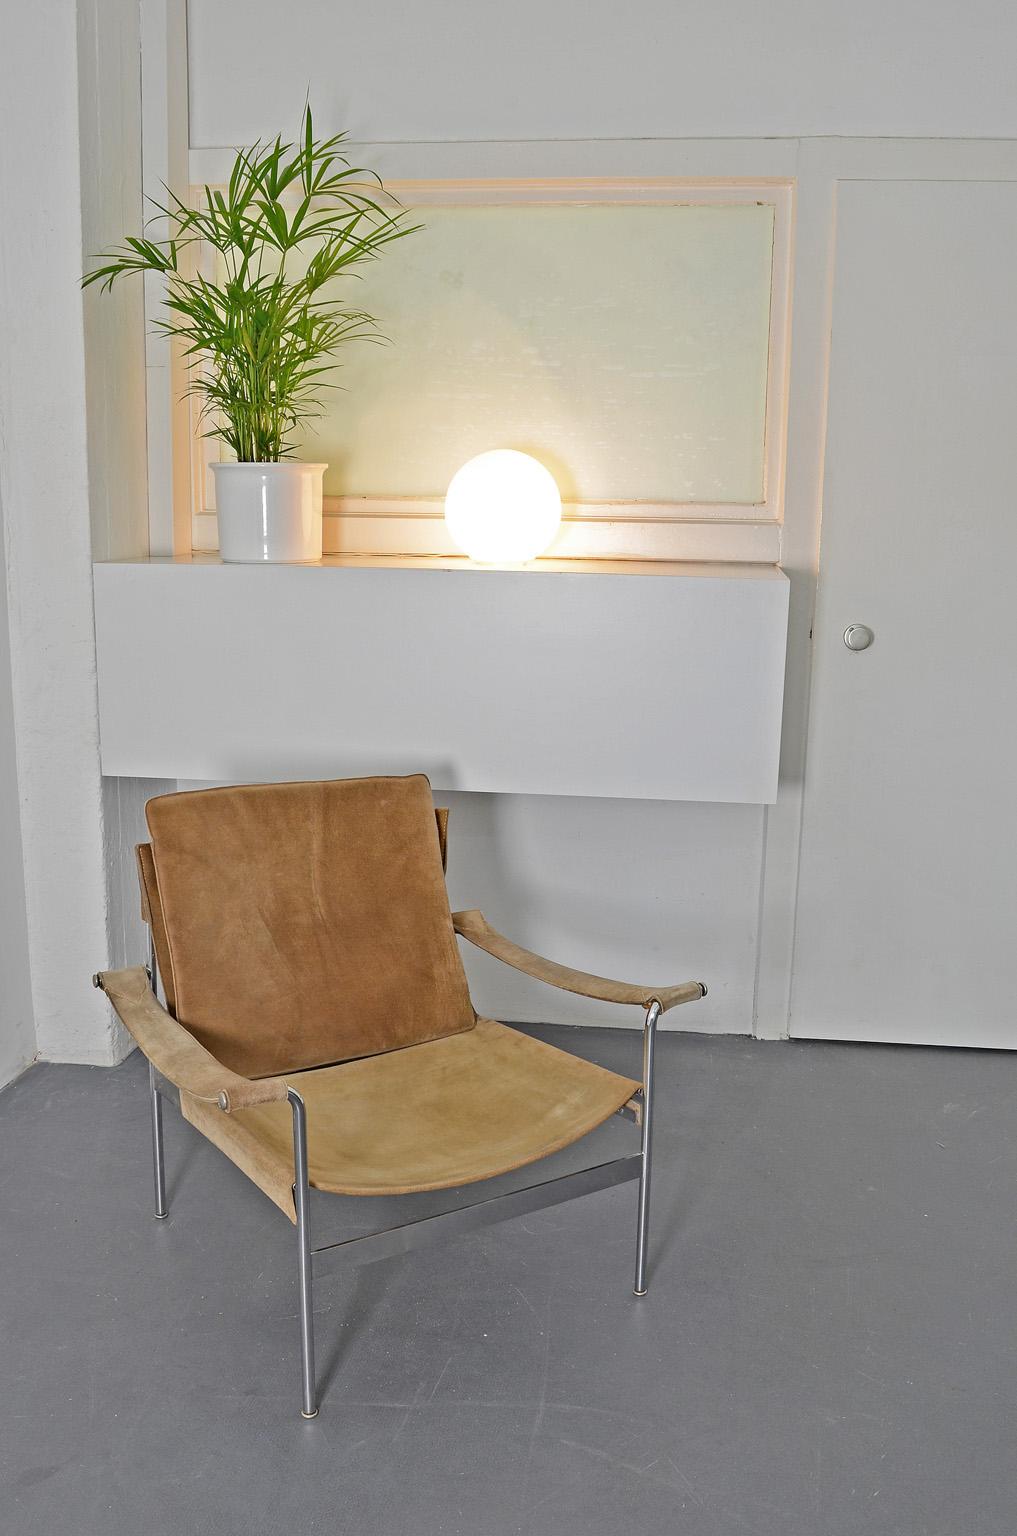 German Suede Sling D99 Lounge Chair Armchair by Hans Koenecke for Tecta 1965 Lightbrown For Sale